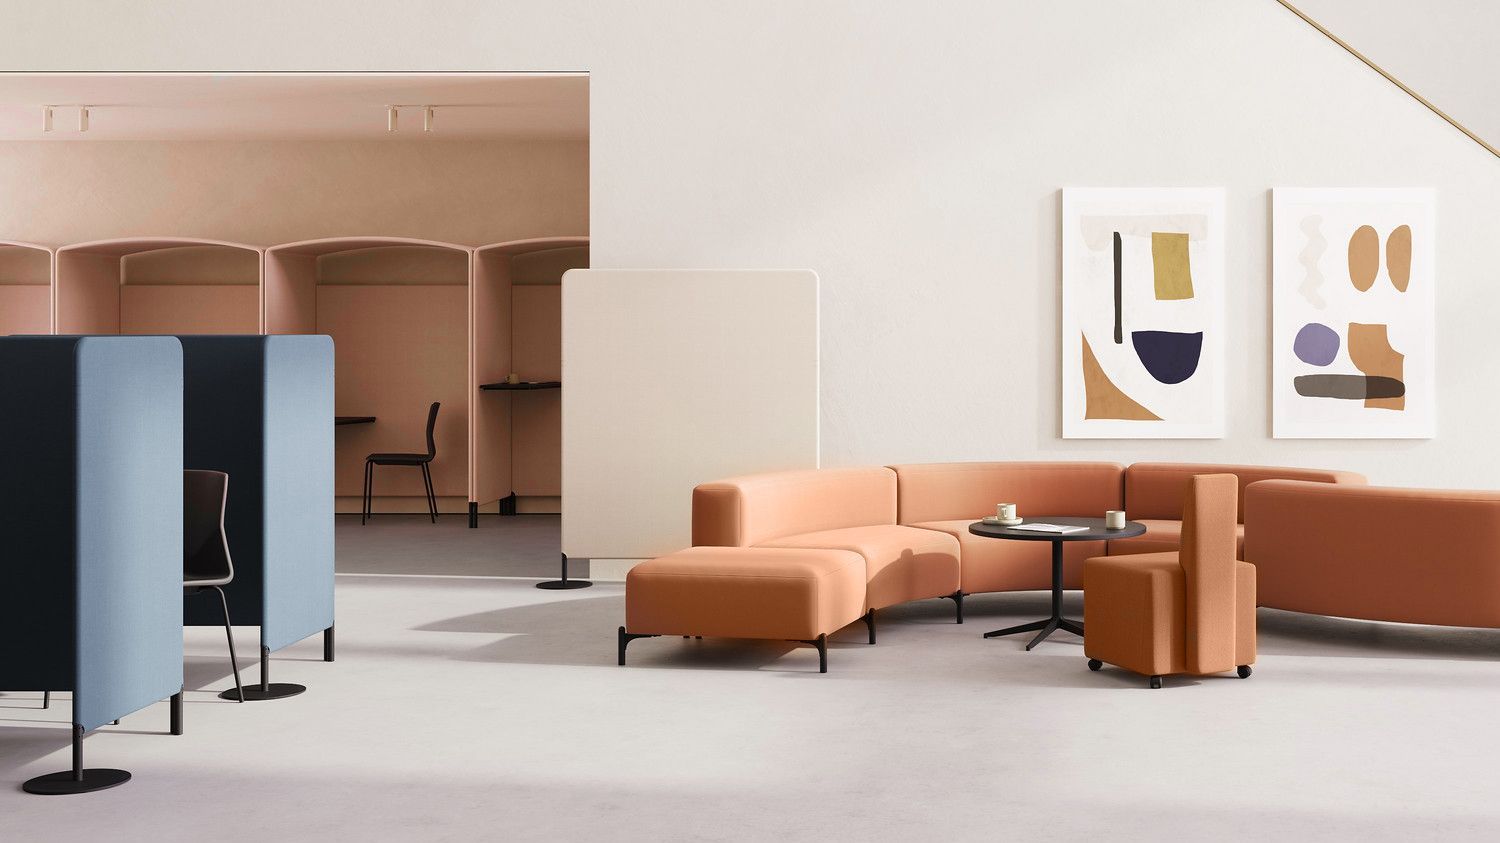 To the left of the image are FourPeople huts in a peach tone. To the right of the image is a peach rounded sofa at a black table. On the wall is modern abstract artwork. 